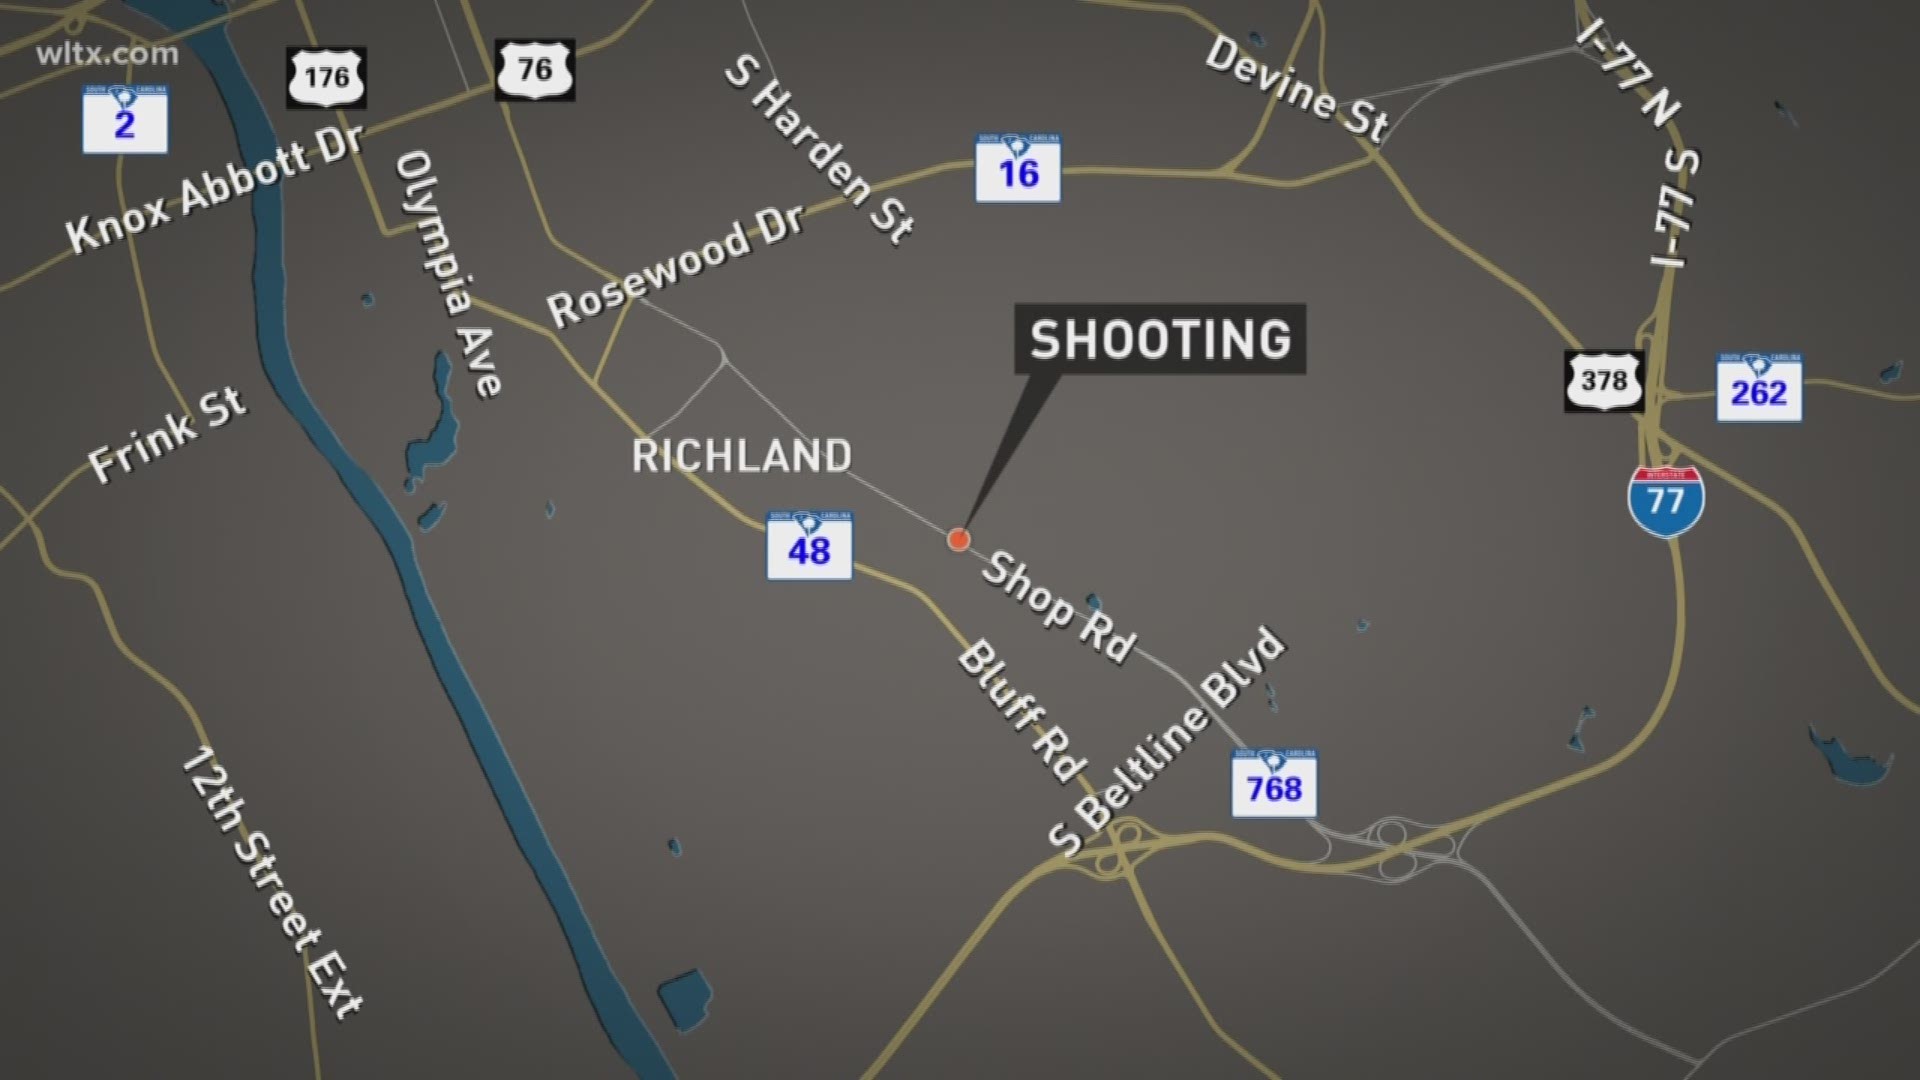 Deputies said one person was injured in a shooting in Richland County.